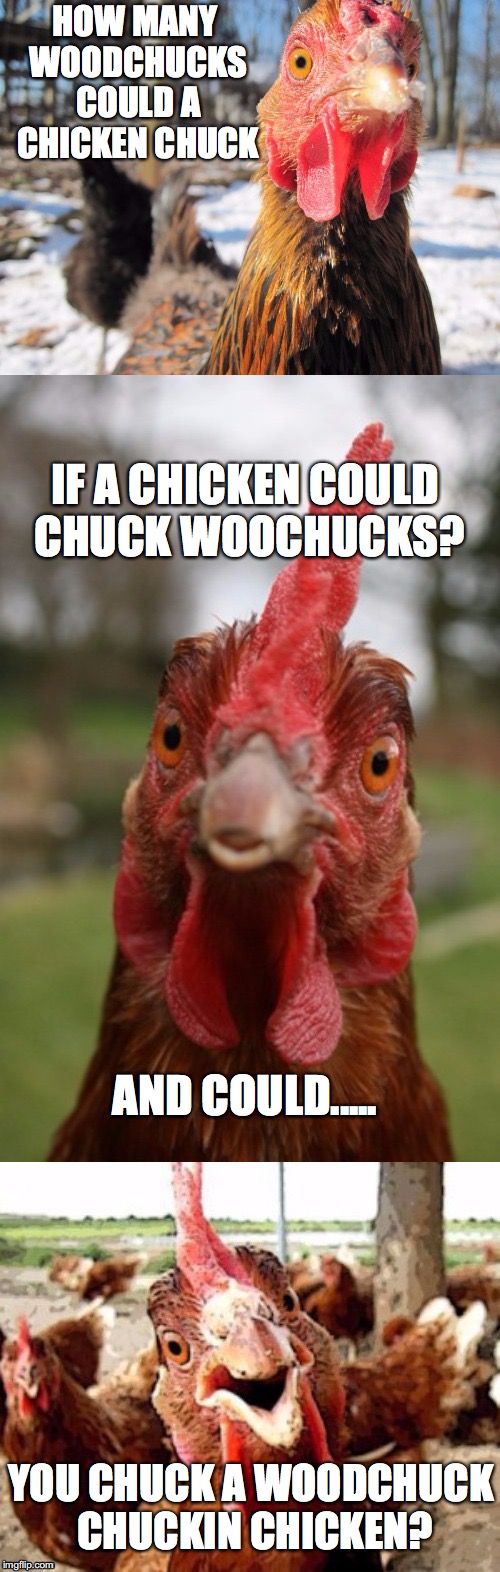 bad pun chicken | HOW MANY WOODCHUCKS COULD A CHICKEN CHUCK; IF A CHICKEN COULD CHUCK WOOCHUCKS? AND COULD..... YOU CHUCK A WOODCHUCK CHUCKIN CHICKEN? | image tagged in bad pun chicken,chicken week,chicken | made w/ Imgflip meme maker